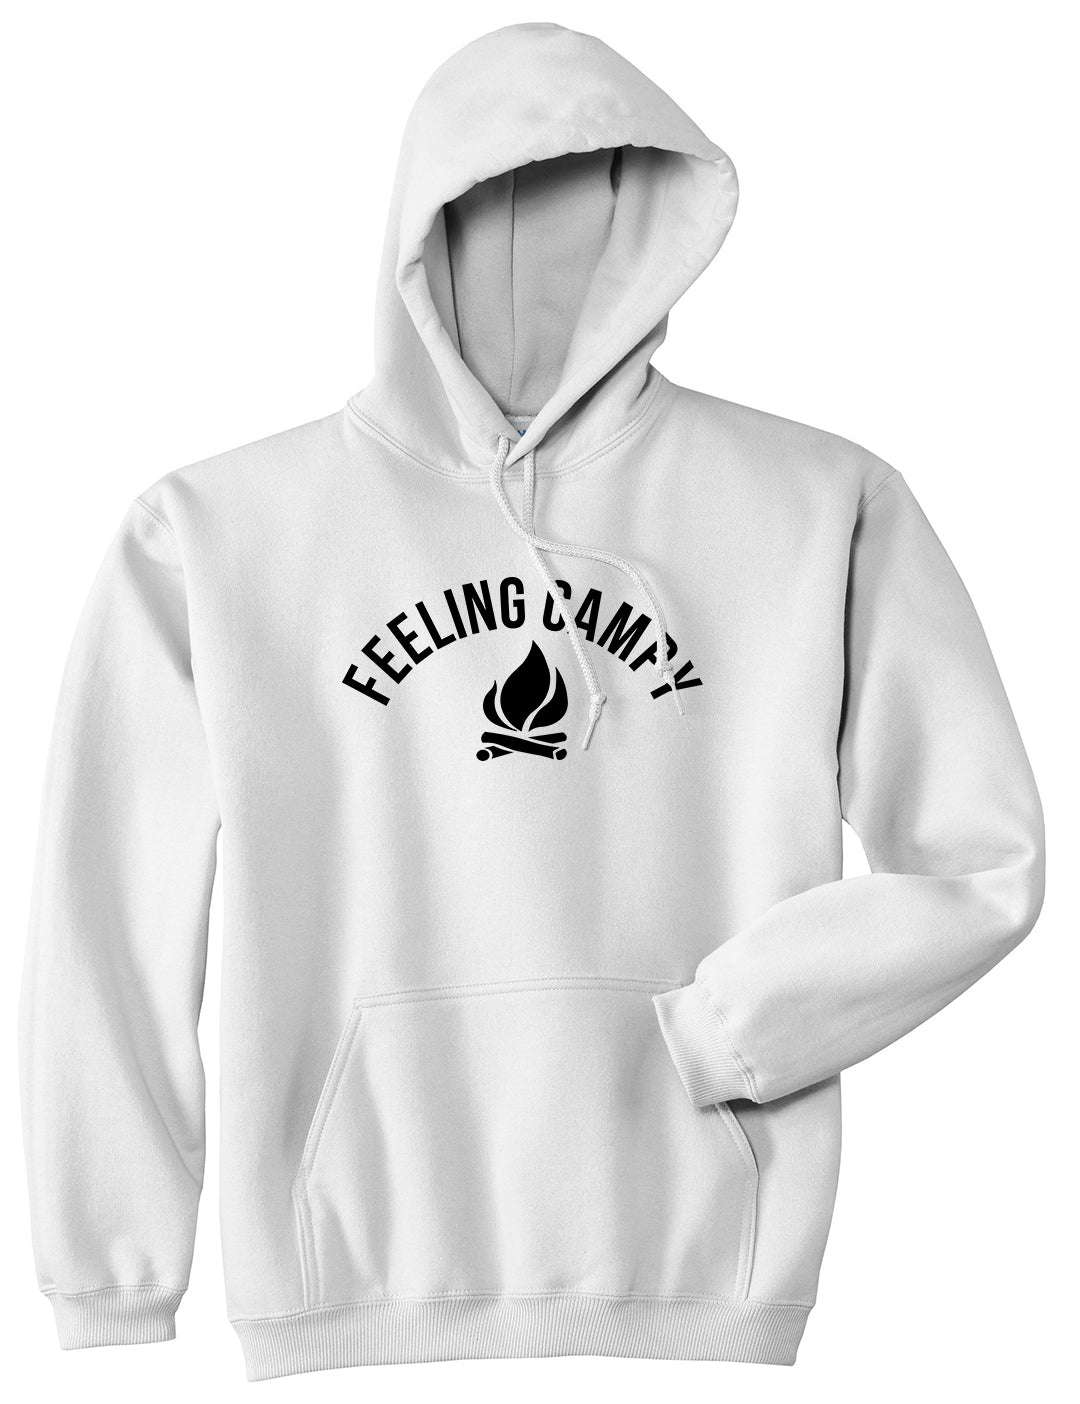 Feeling Campy Camp Fire Outdoor Mens Pullover Hoodie White